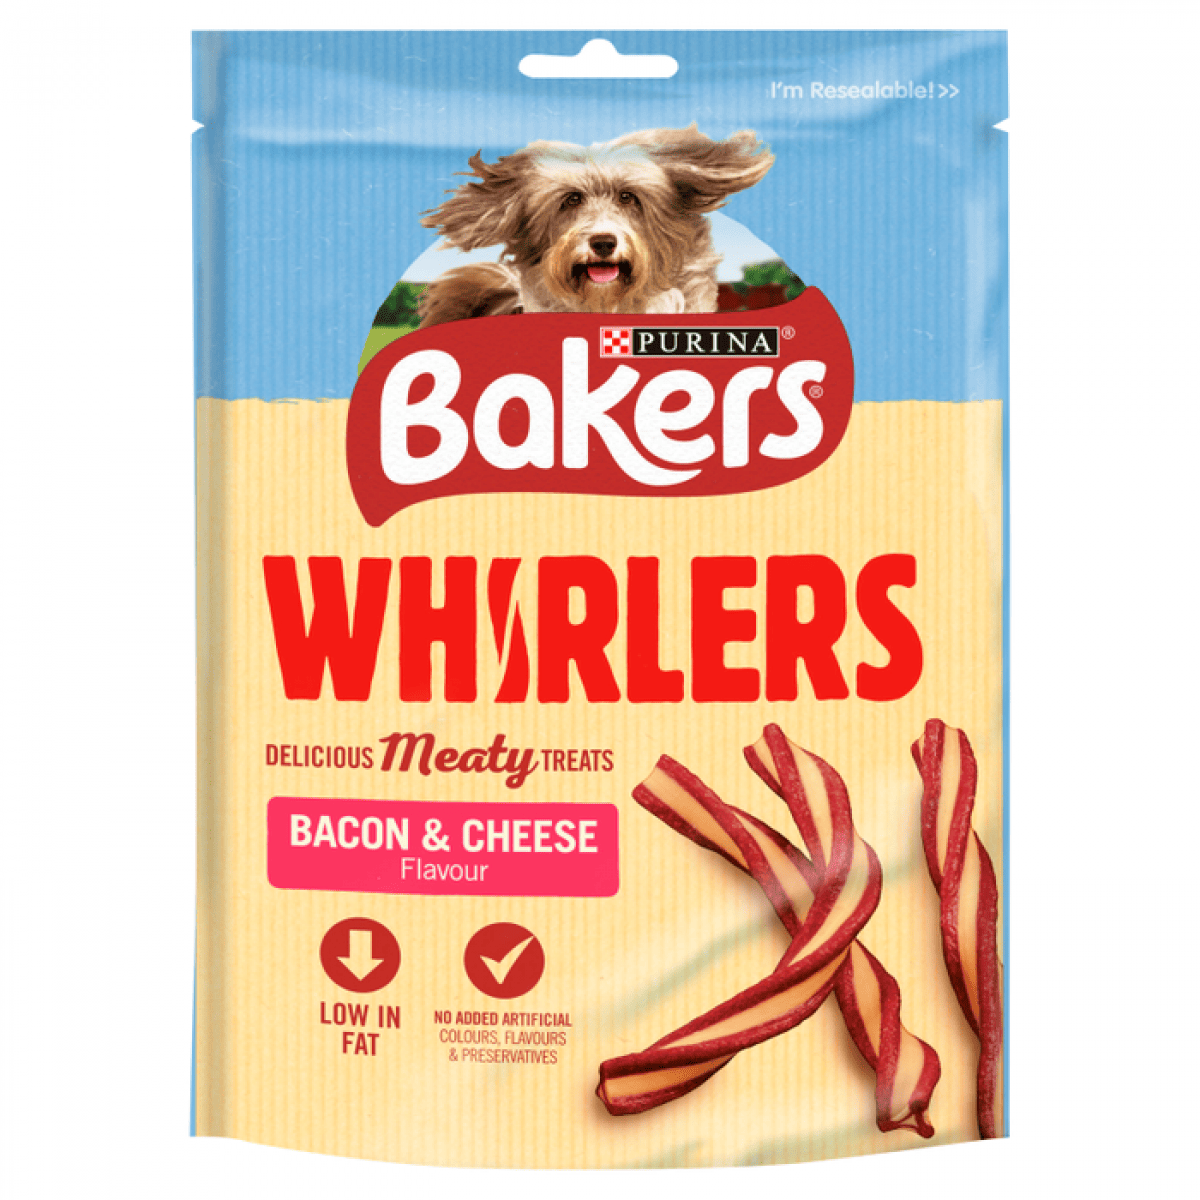 Bakers- Bacon & Cheese Whirlers 130g – Pawfect Supplies Ltd Product Image